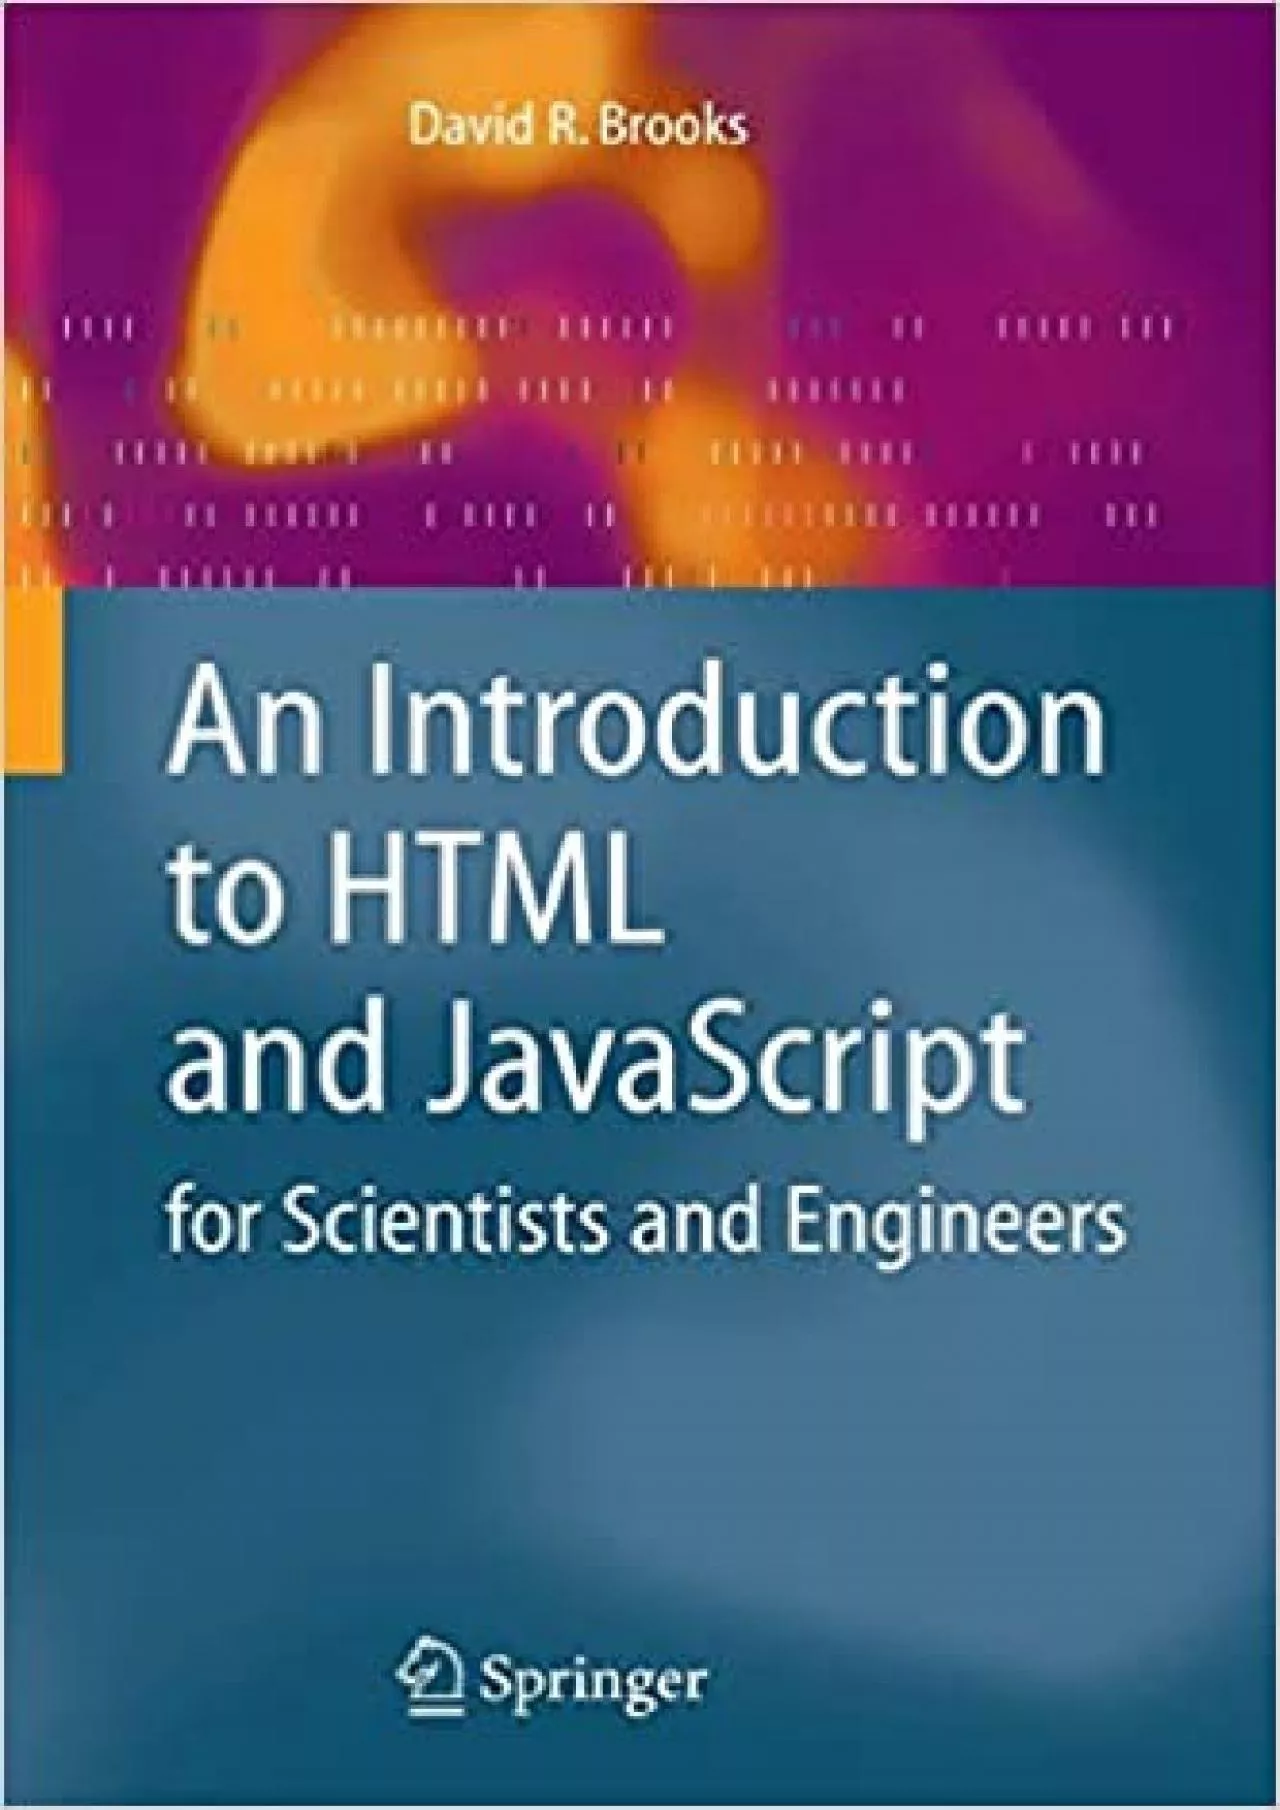 (BOOS)-An Introduction to HTML and JavaScript for Scientists and Engineers